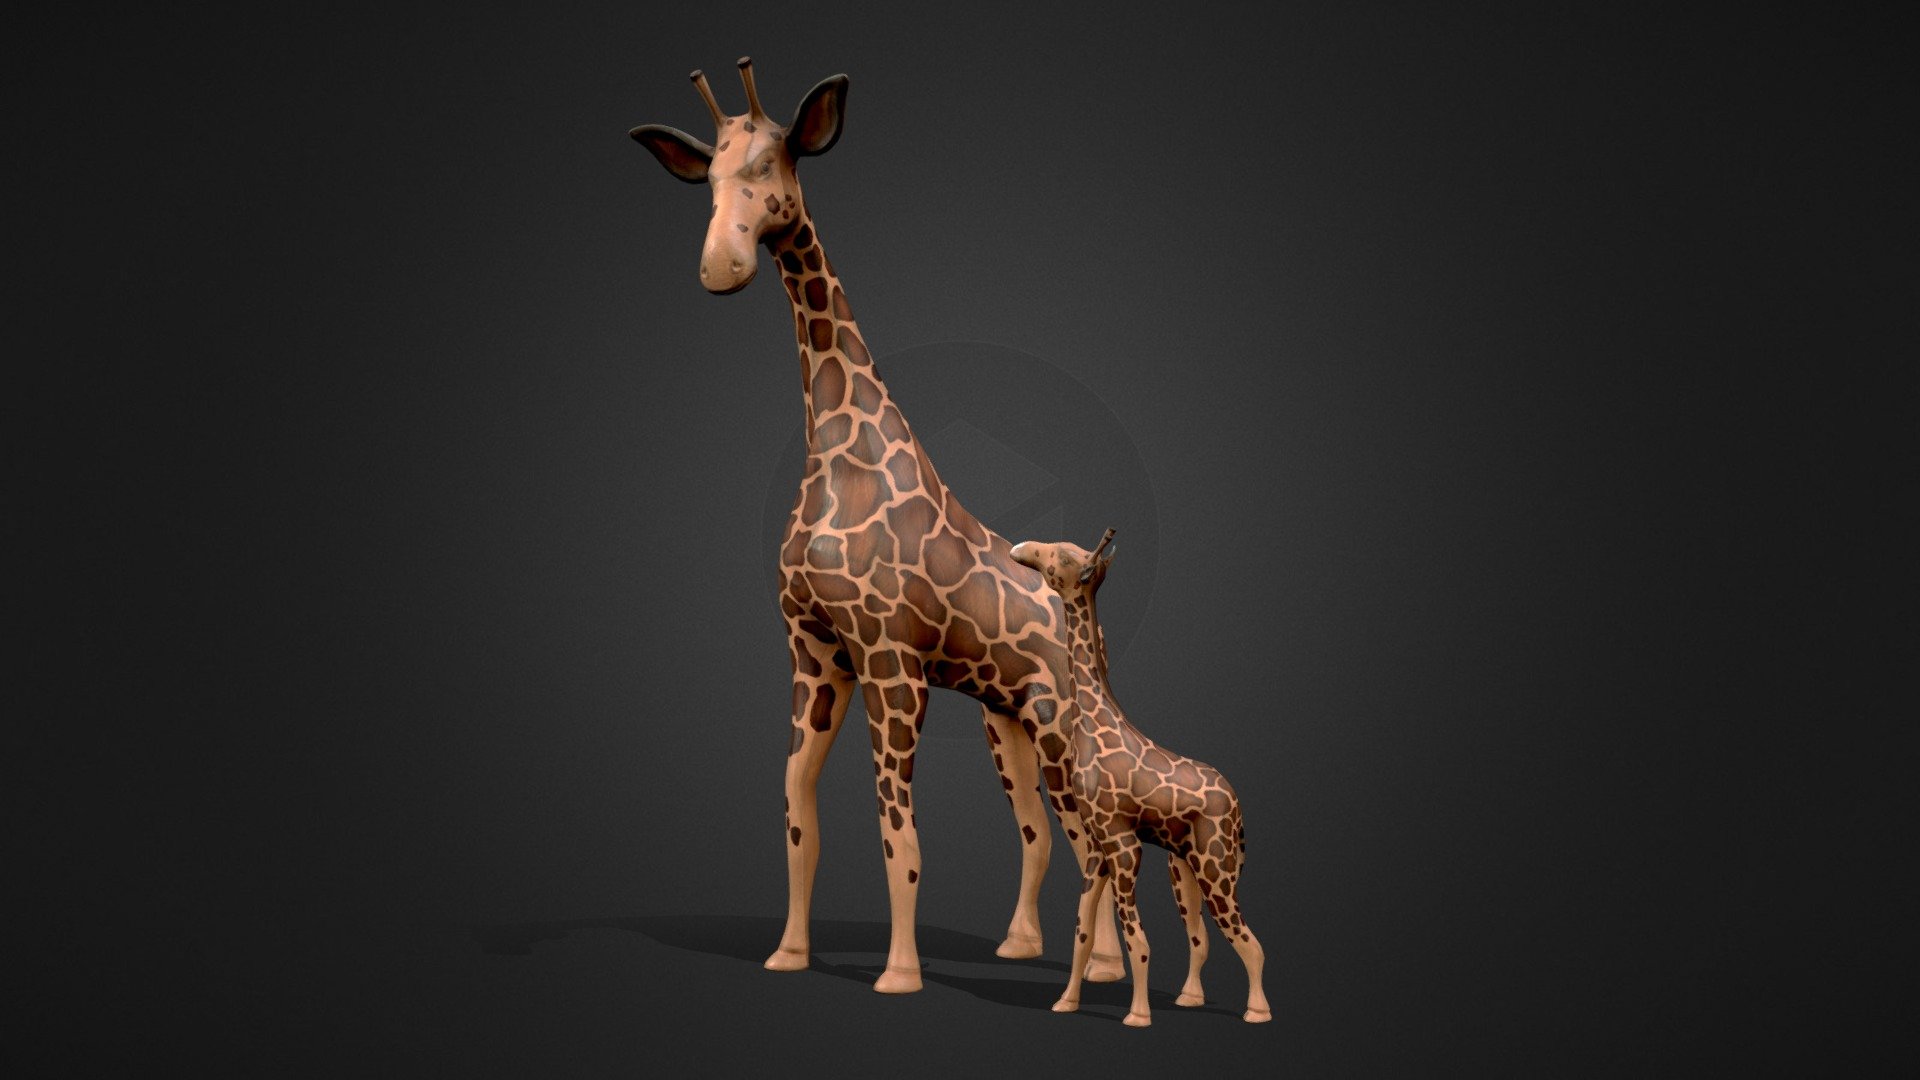 A mother giraffe taking her daughter on a walk!

These giraffe statues bring a handmade feel with its wooden textures, creating a cozy atmosphere. ideal to use as decoration pieces, composition and story telling elements for a variaty of scenes.

This model contains clean topology, allowing simple deformation in order to be able to pose however needed. Considering its low polycount, it is suitable for game engines, but it also can be subdivided to be used on offline renderings suites.

By purchasing, you'll have acess to the base model as well, which is the giraffe on a neutral pose. You can check it here: https://shorturl.at/sHIUW

Please, check my portfolio pages at:
https://www.behance.net/VictorAguiar
https://www.artstation.com/victoraguiar - A mother giraffe taking her daughter on a walk! - 3D model by victoraguiar 3d model